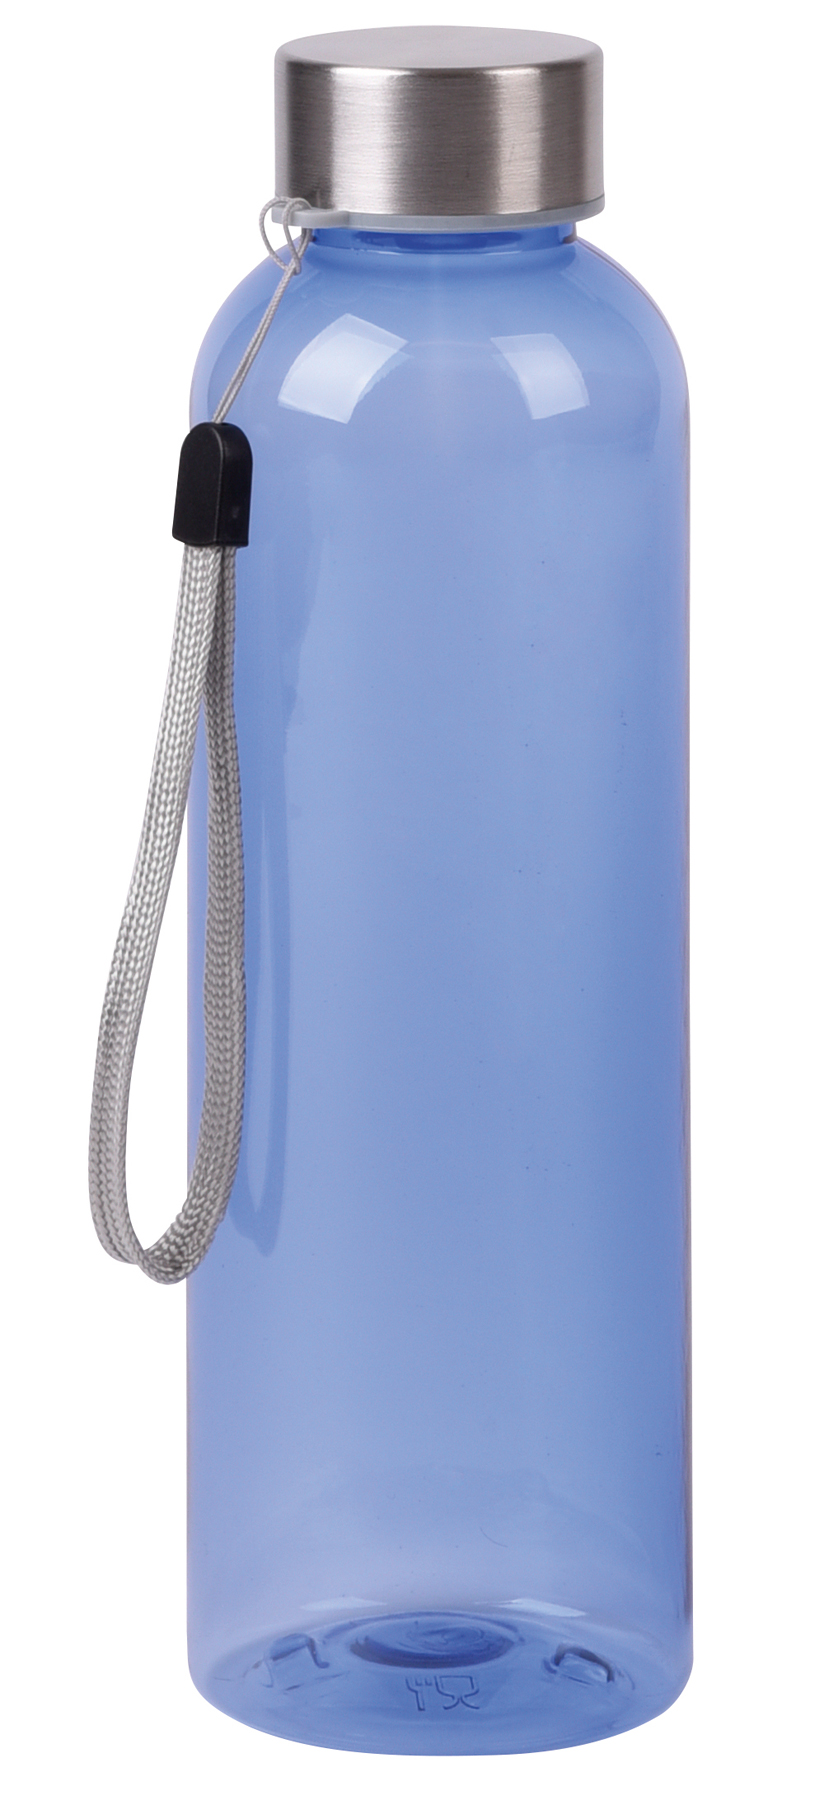 Drinking bottle SIMPLE ECO - royal blue